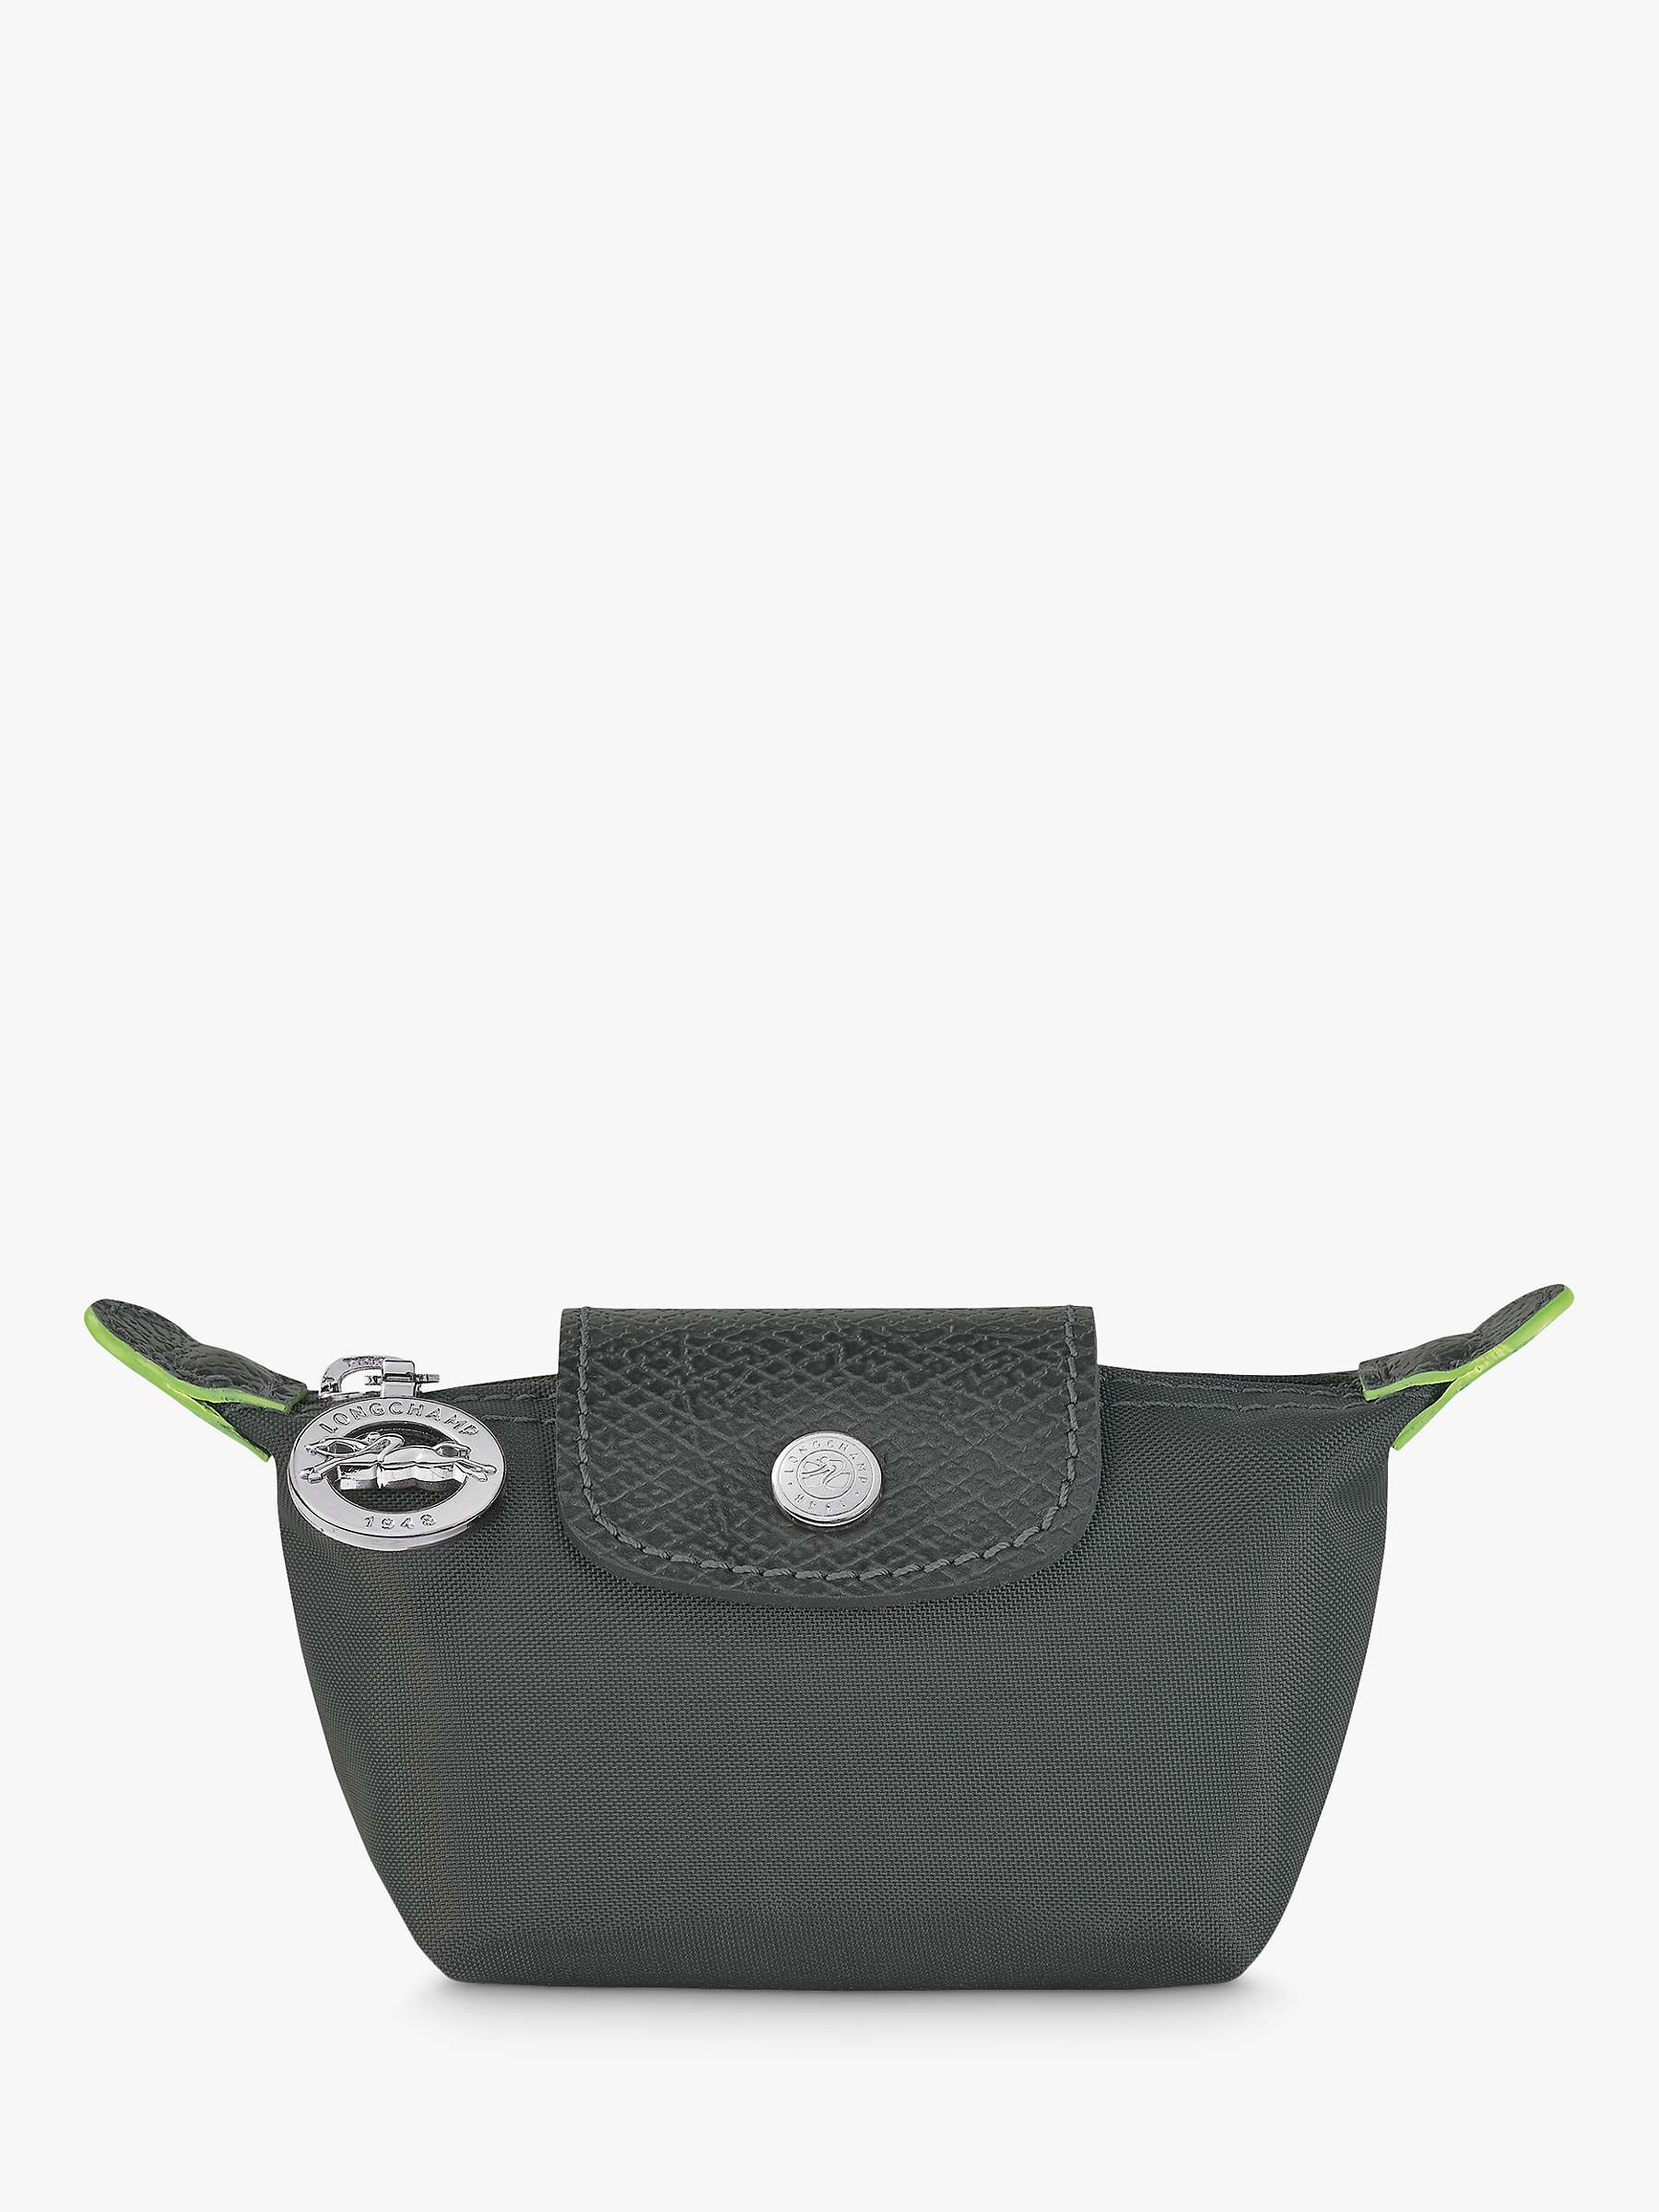 Buy Longchamp Le Pliage Green Recycled Canvas Coin Purse Online at johnlewis.com